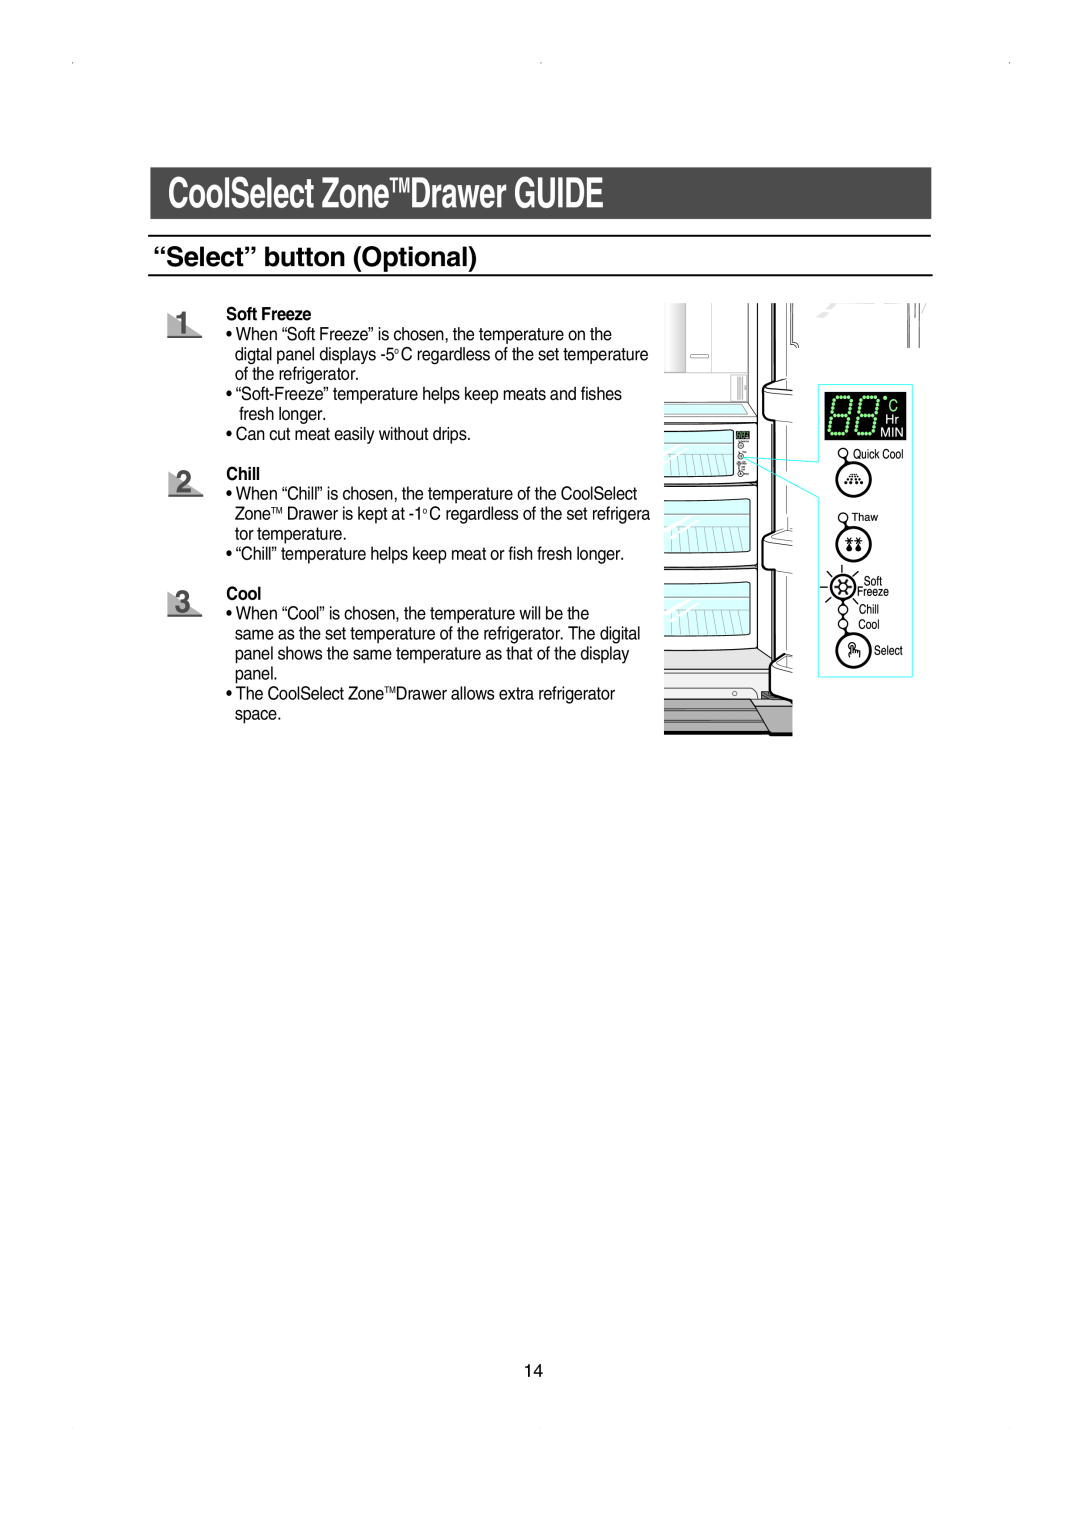 Samsung RS23FESW owner manual CoolSelect ZoneTMDrawer GUIDE, “Select” button Optional, Soft Freeze, Chill 